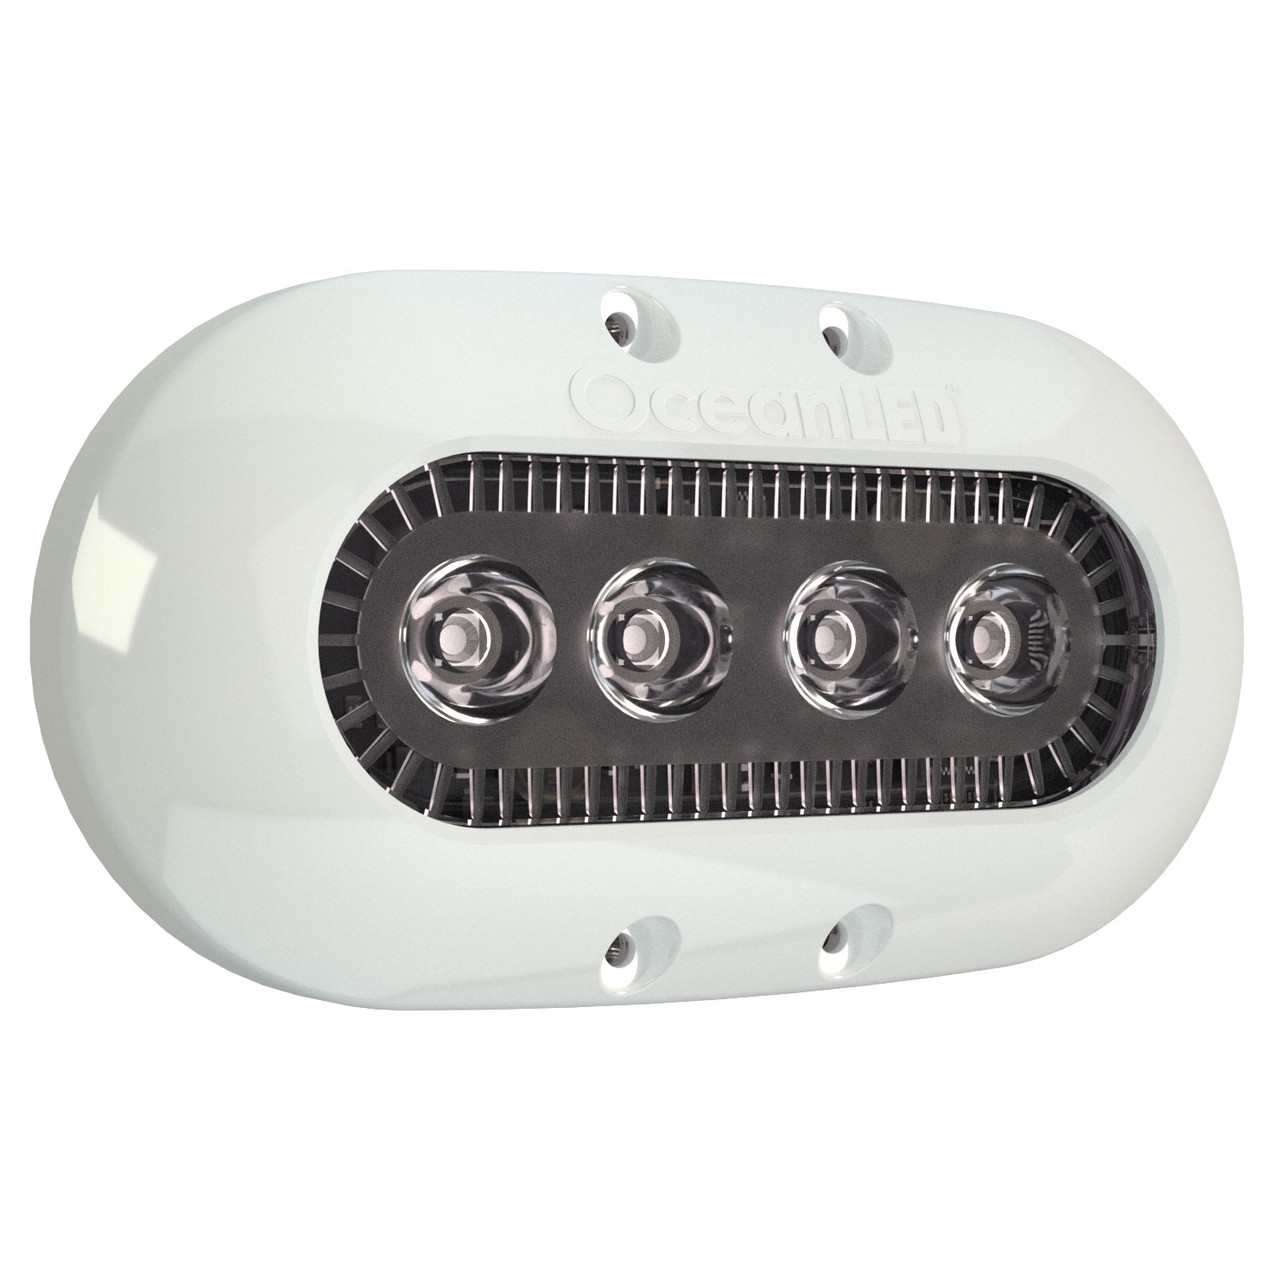 Ocean LED - X-SERIES X4 Underwater Light - With Isolating Mounting Kit, 9-32V, IP69K, Circular Beam Angle, Up to 1150 Fixture Lumens - Apollo Lighting